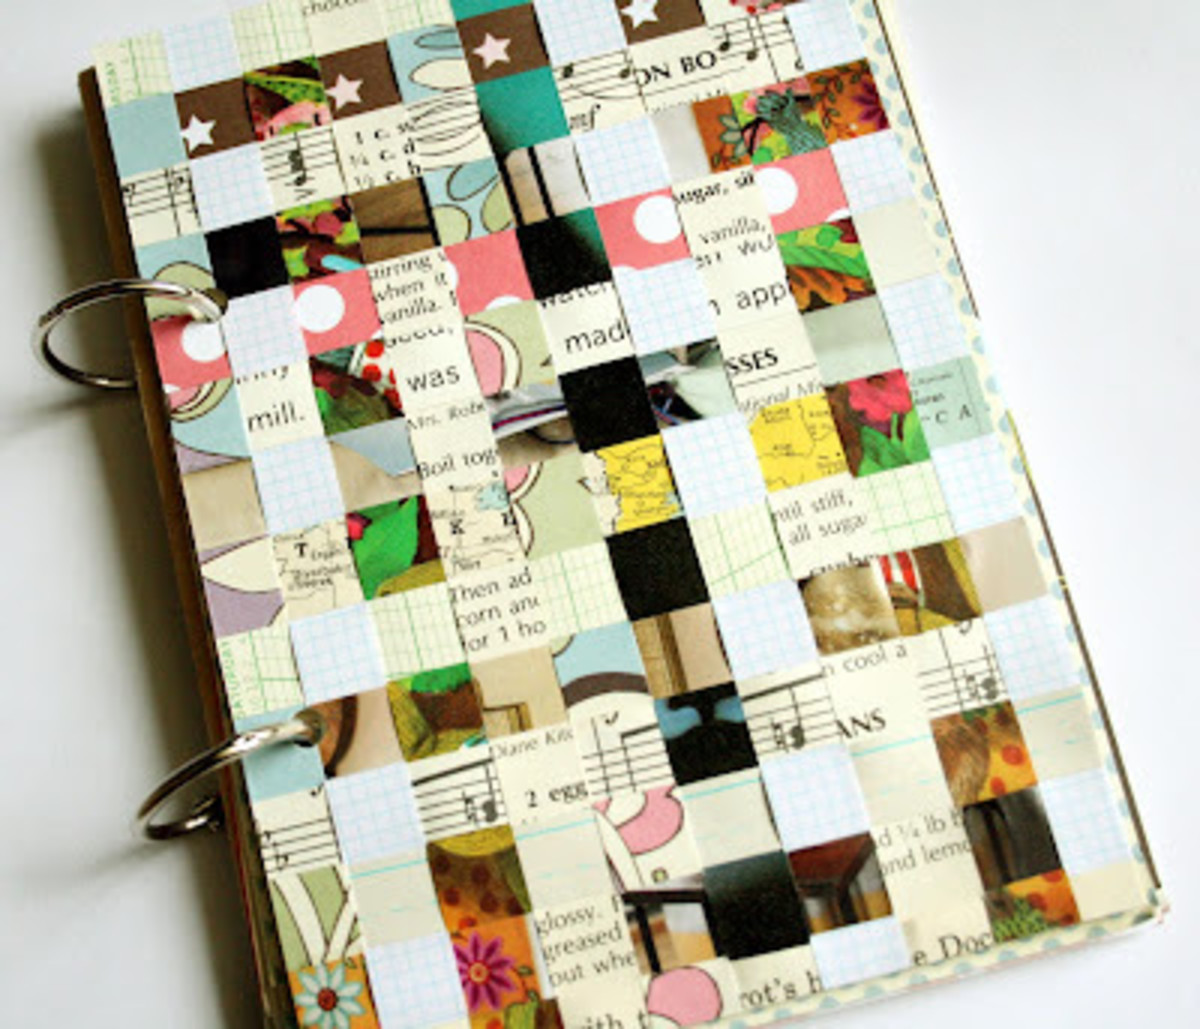 A truly custom journal cover made of cardboard and paper scraps. Great recycle project. I would add a nameplate to this cover.